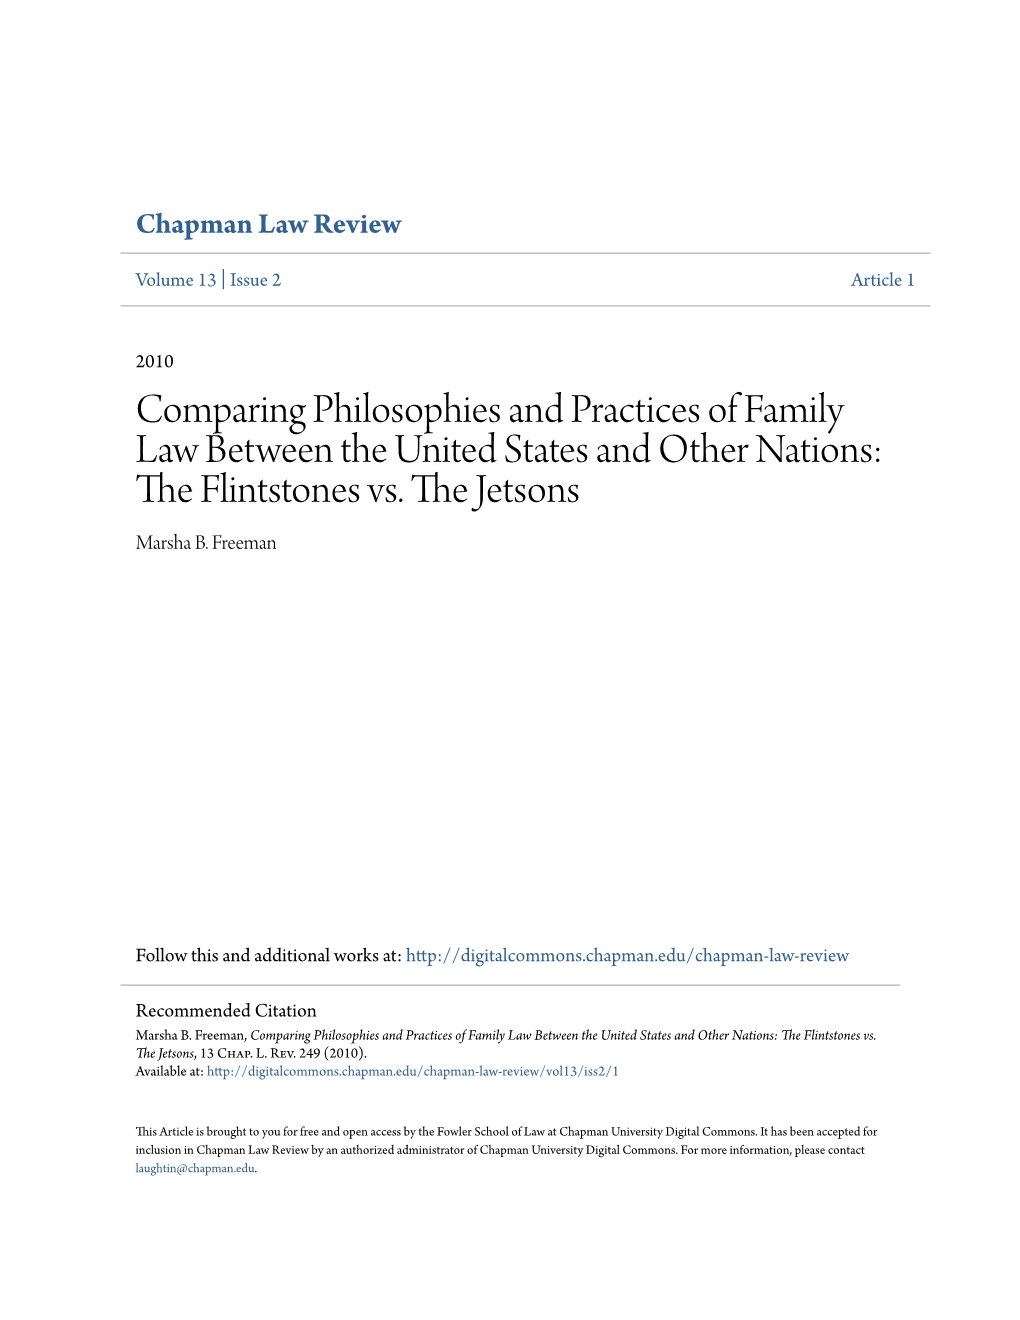 Comparing Philosophies and Practices of Family Law Between the United States and Other Nations: the Linf Tstones Vs